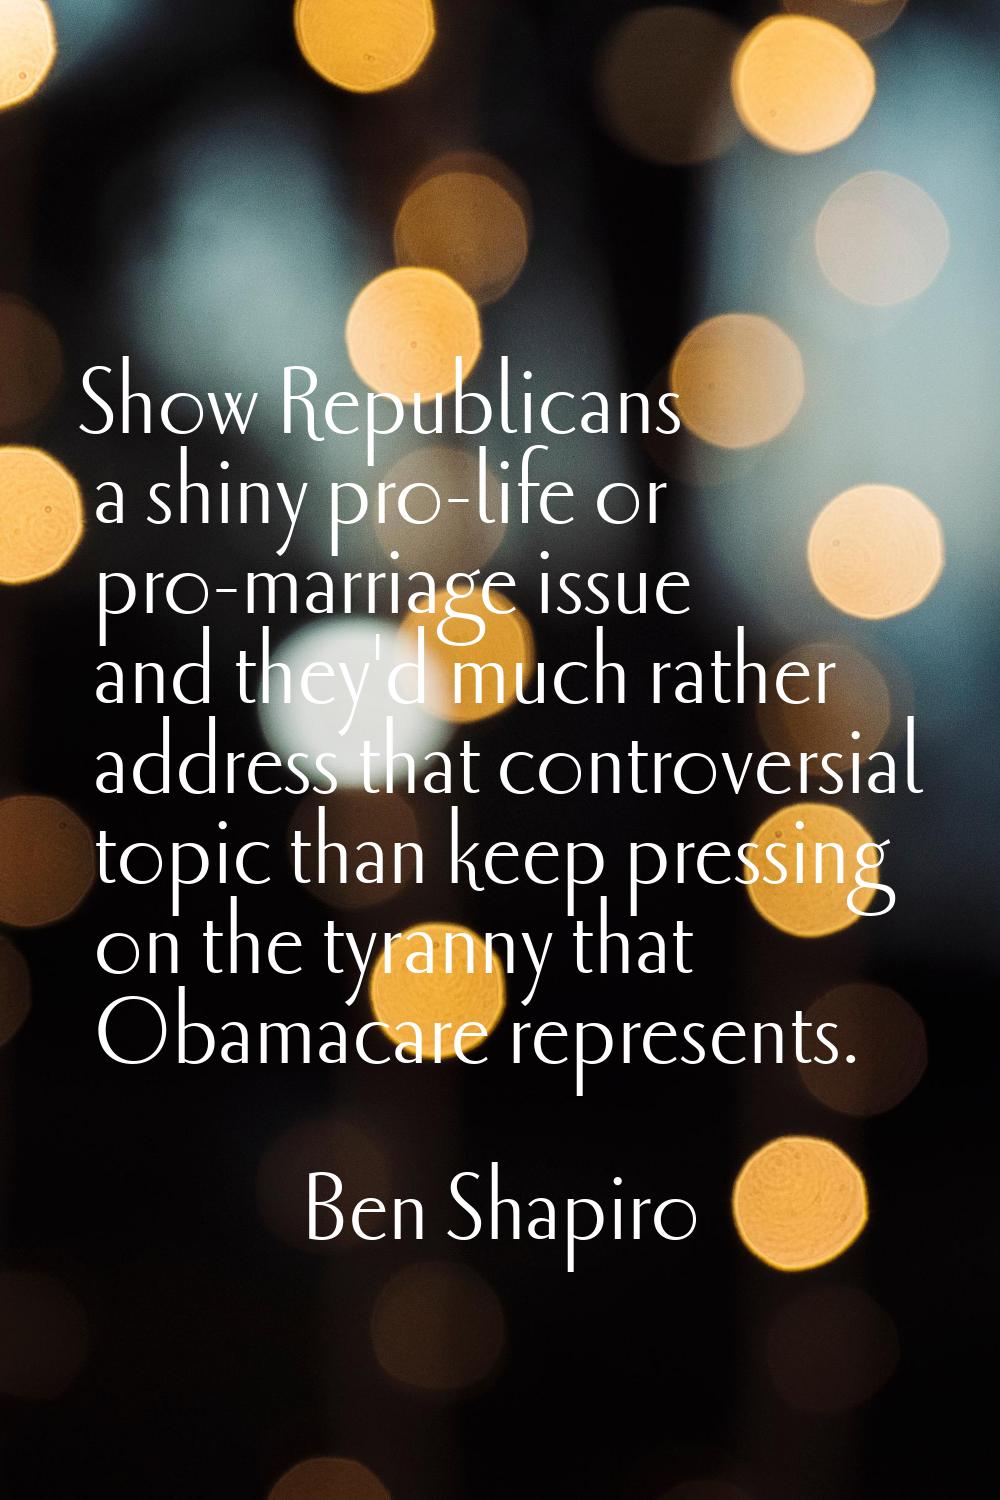 Show Republicans a shiny pro-life or pro-marriage issue and they'd much rather address that controv